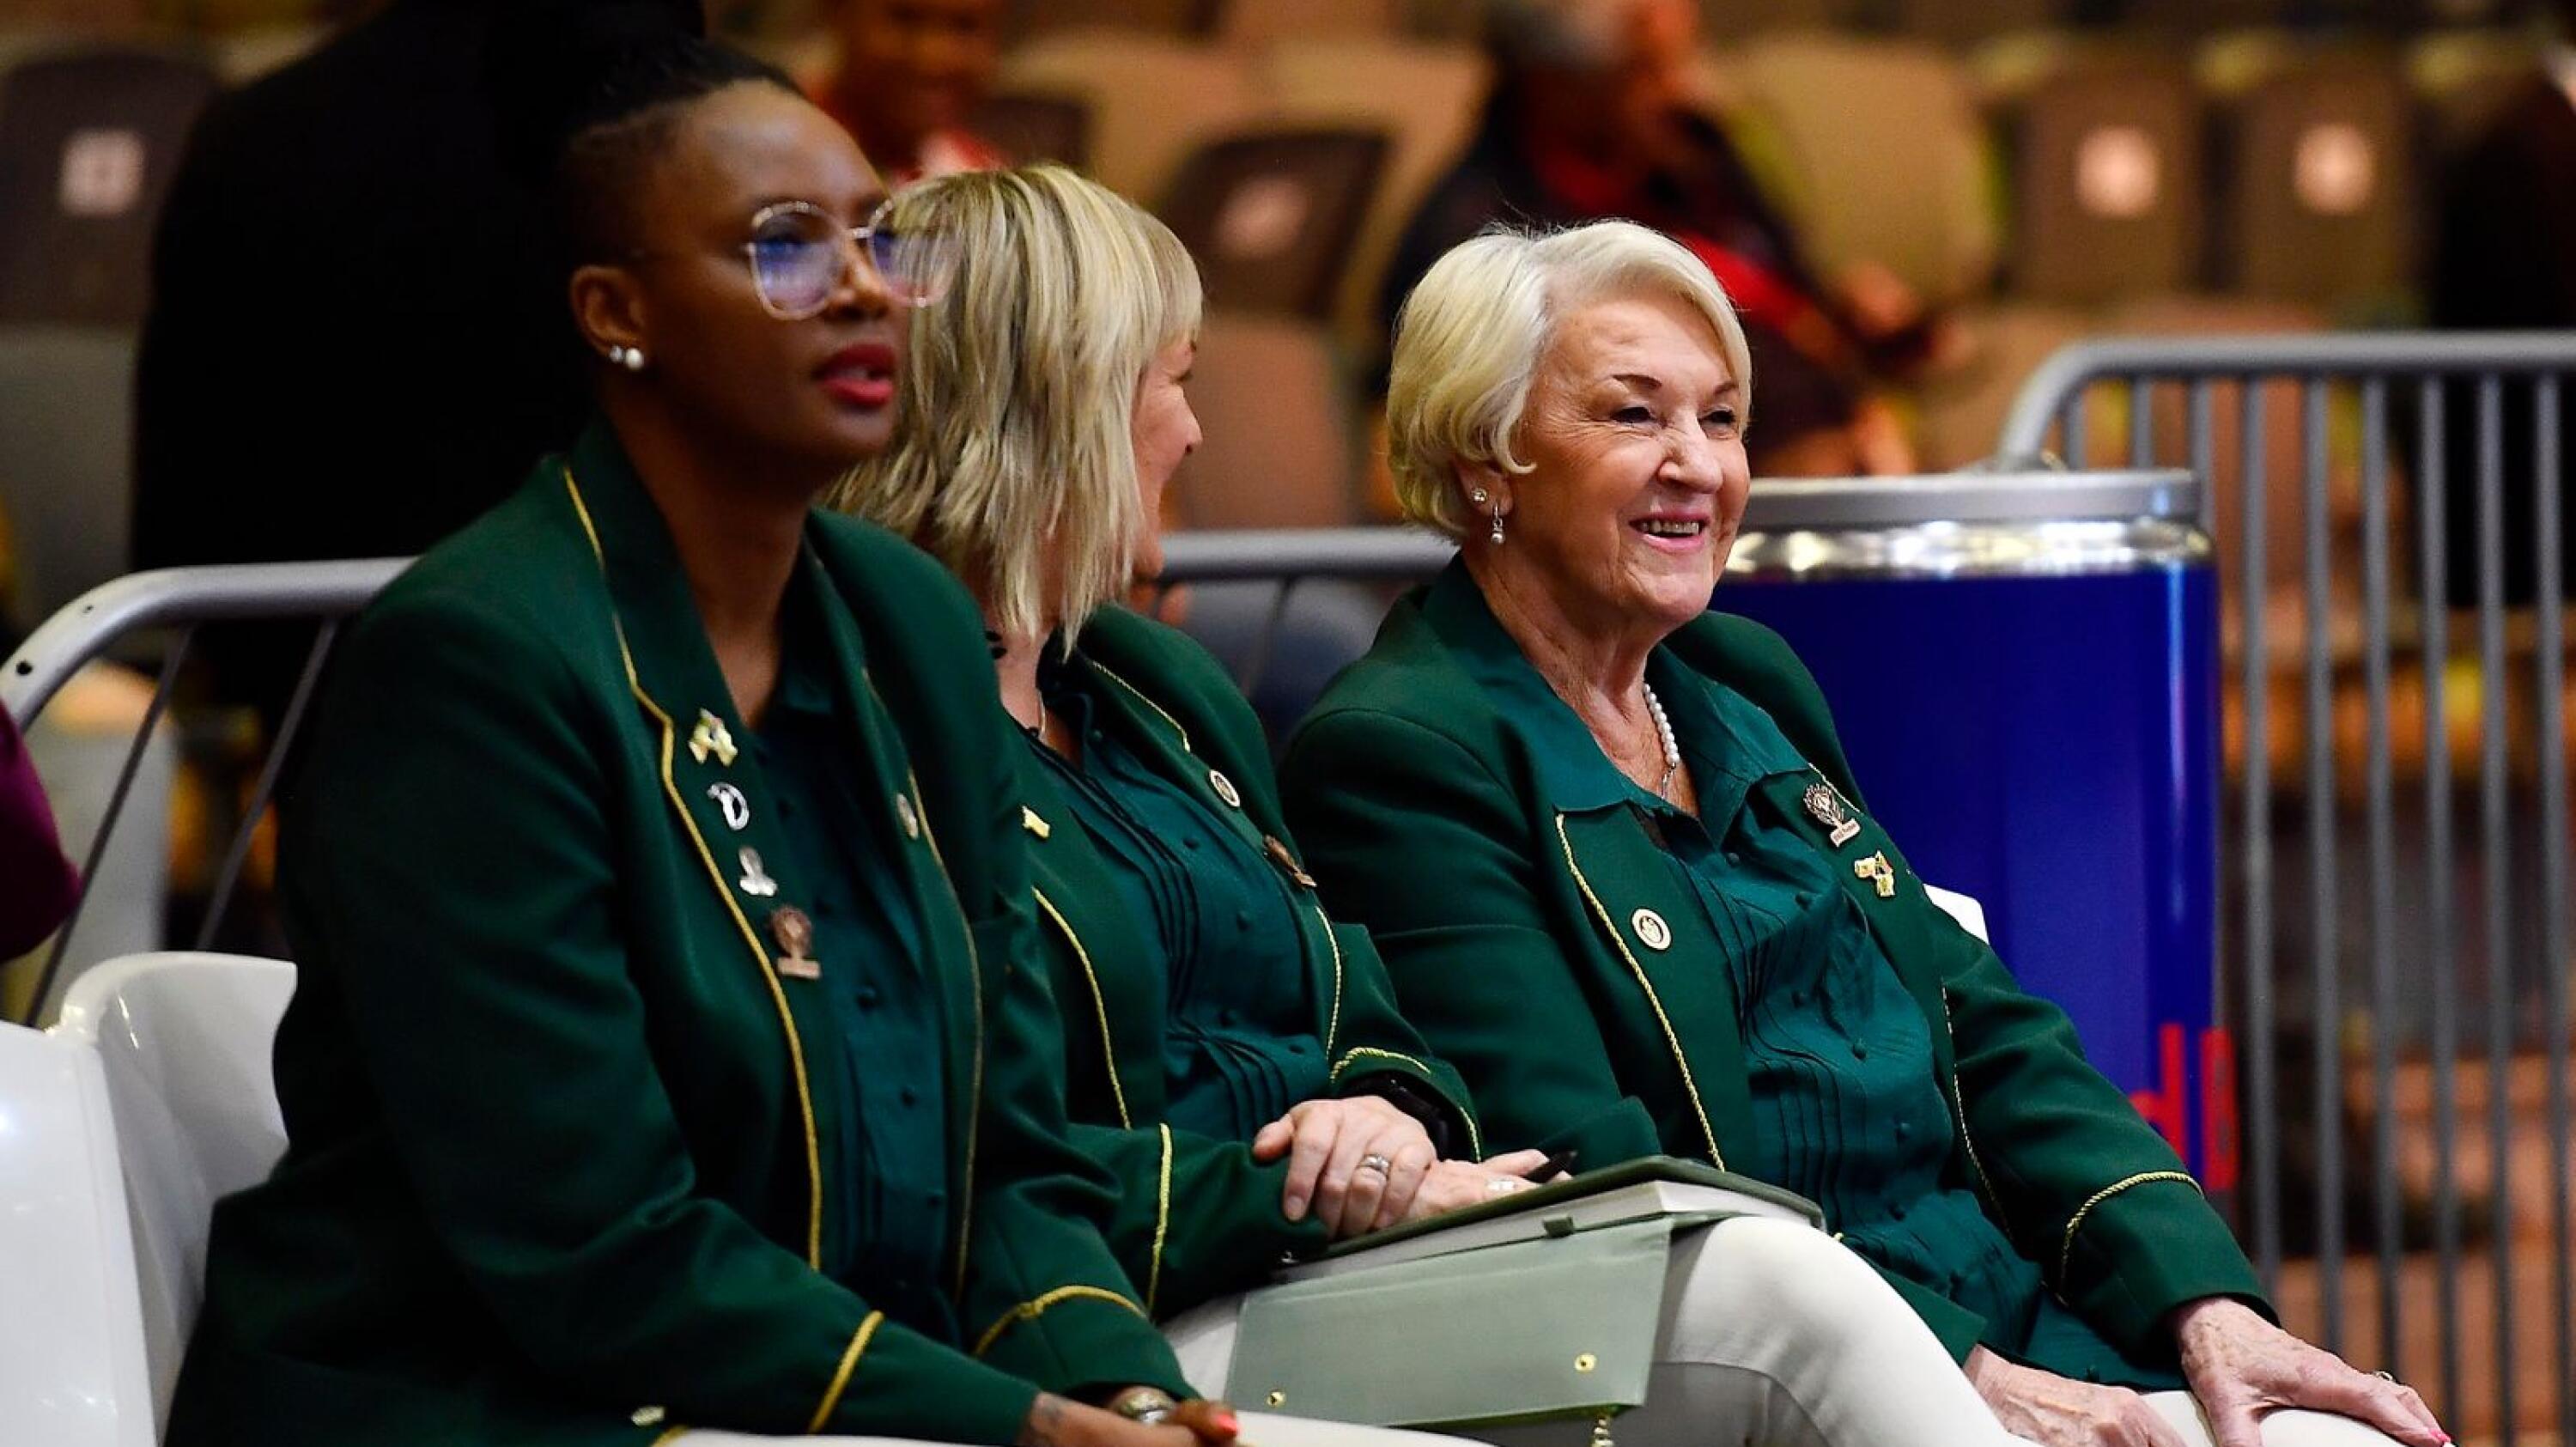  Dumisani Chauke of South Africa, Nicole Cussack assistant coach) and head coach Norma Plummer sit one the sidelines 